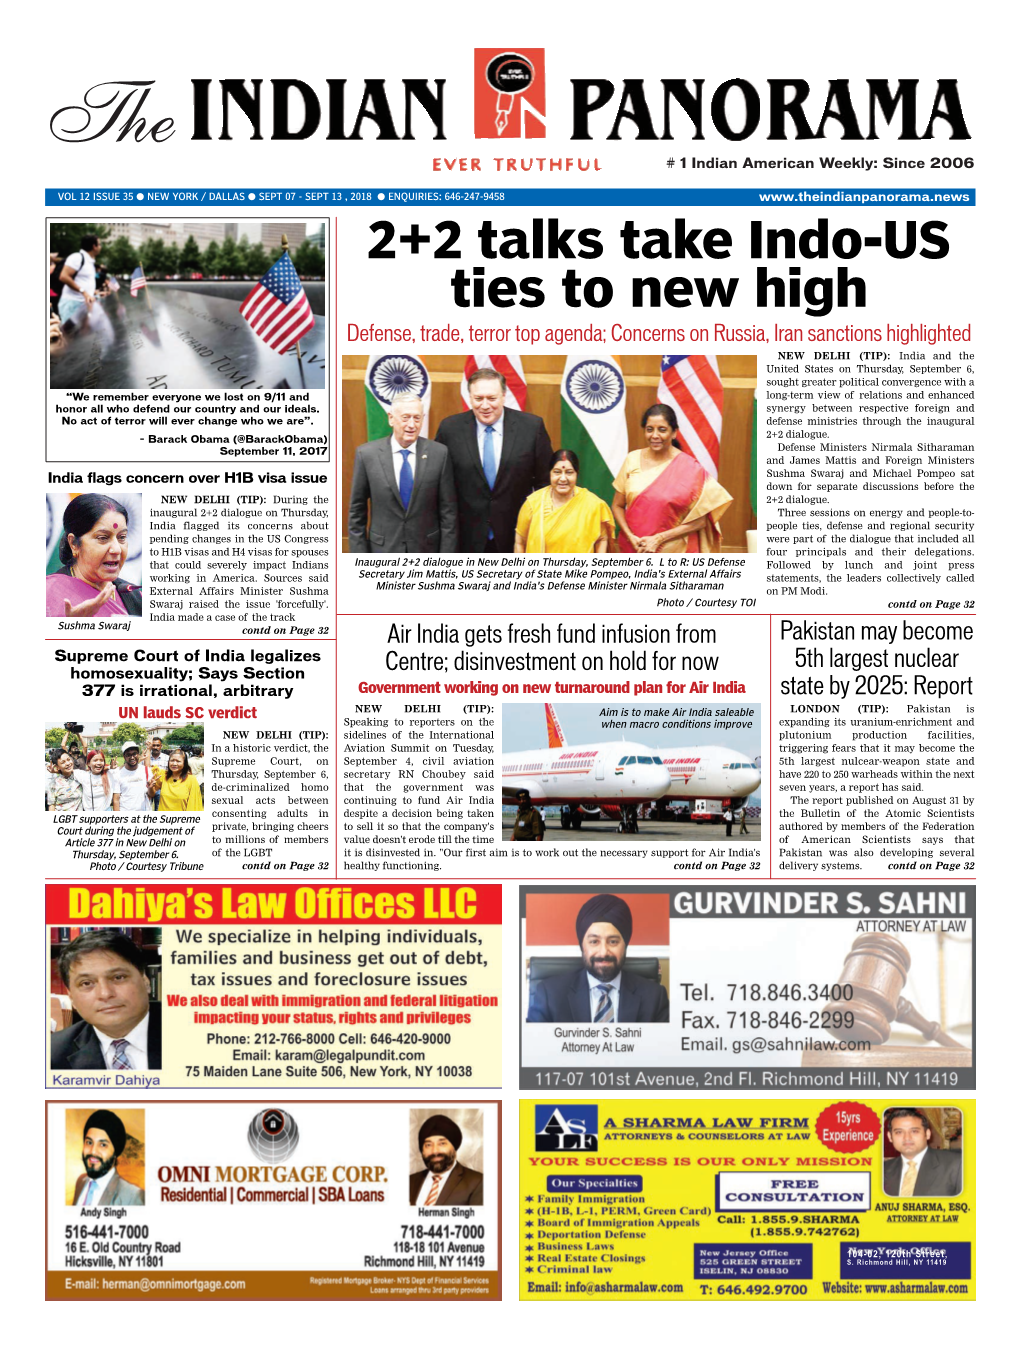 2+2 Talks Take Indo-US Ties to New High